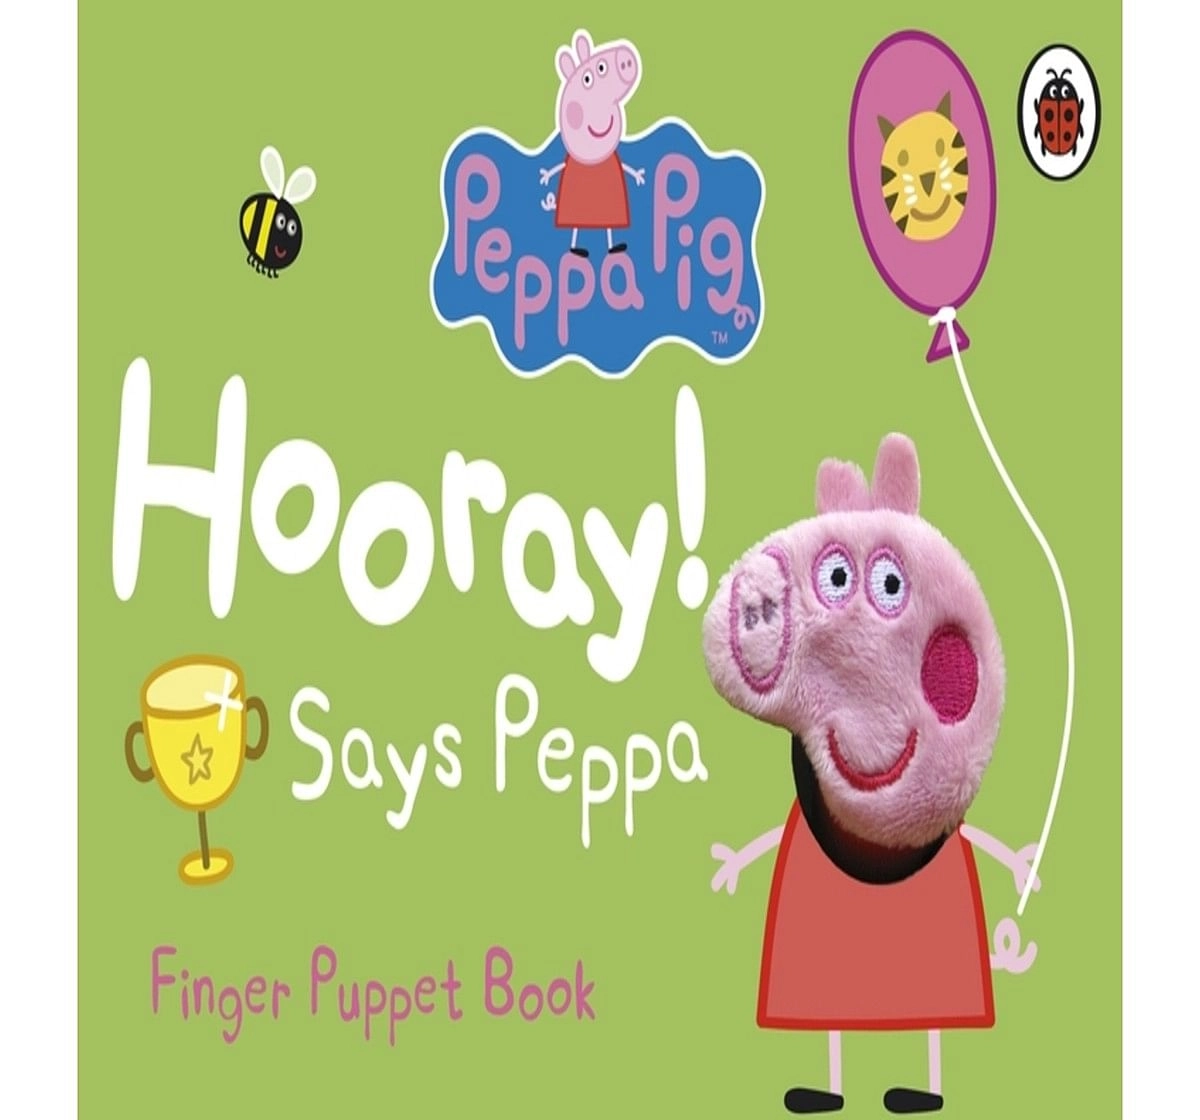 Peppa Pig : Hooray! Says Peppa Finger Pu, 14 Pages Book by Ladybird, Board Book